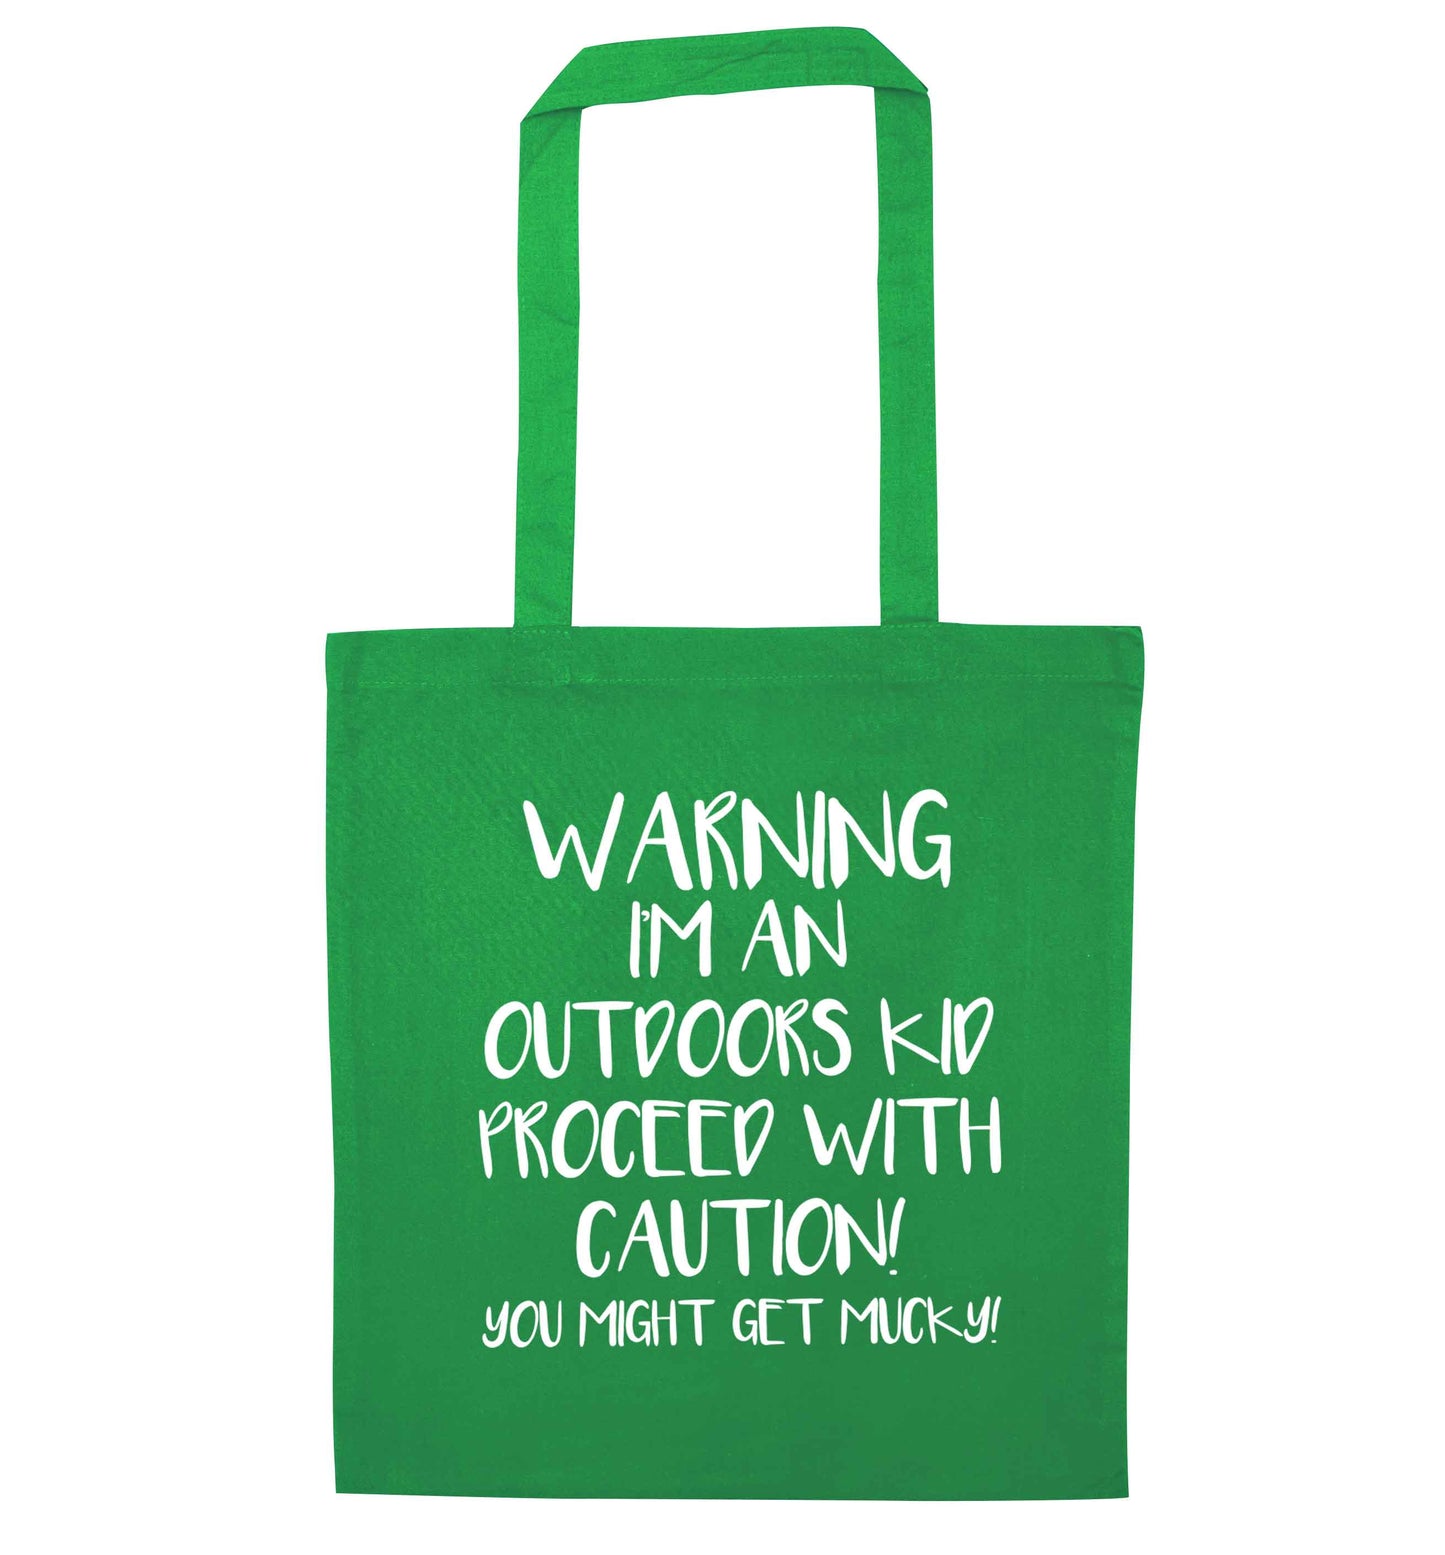 Warning I'm an outdoors kid! Proceed with caution you might get mucky green tote bag